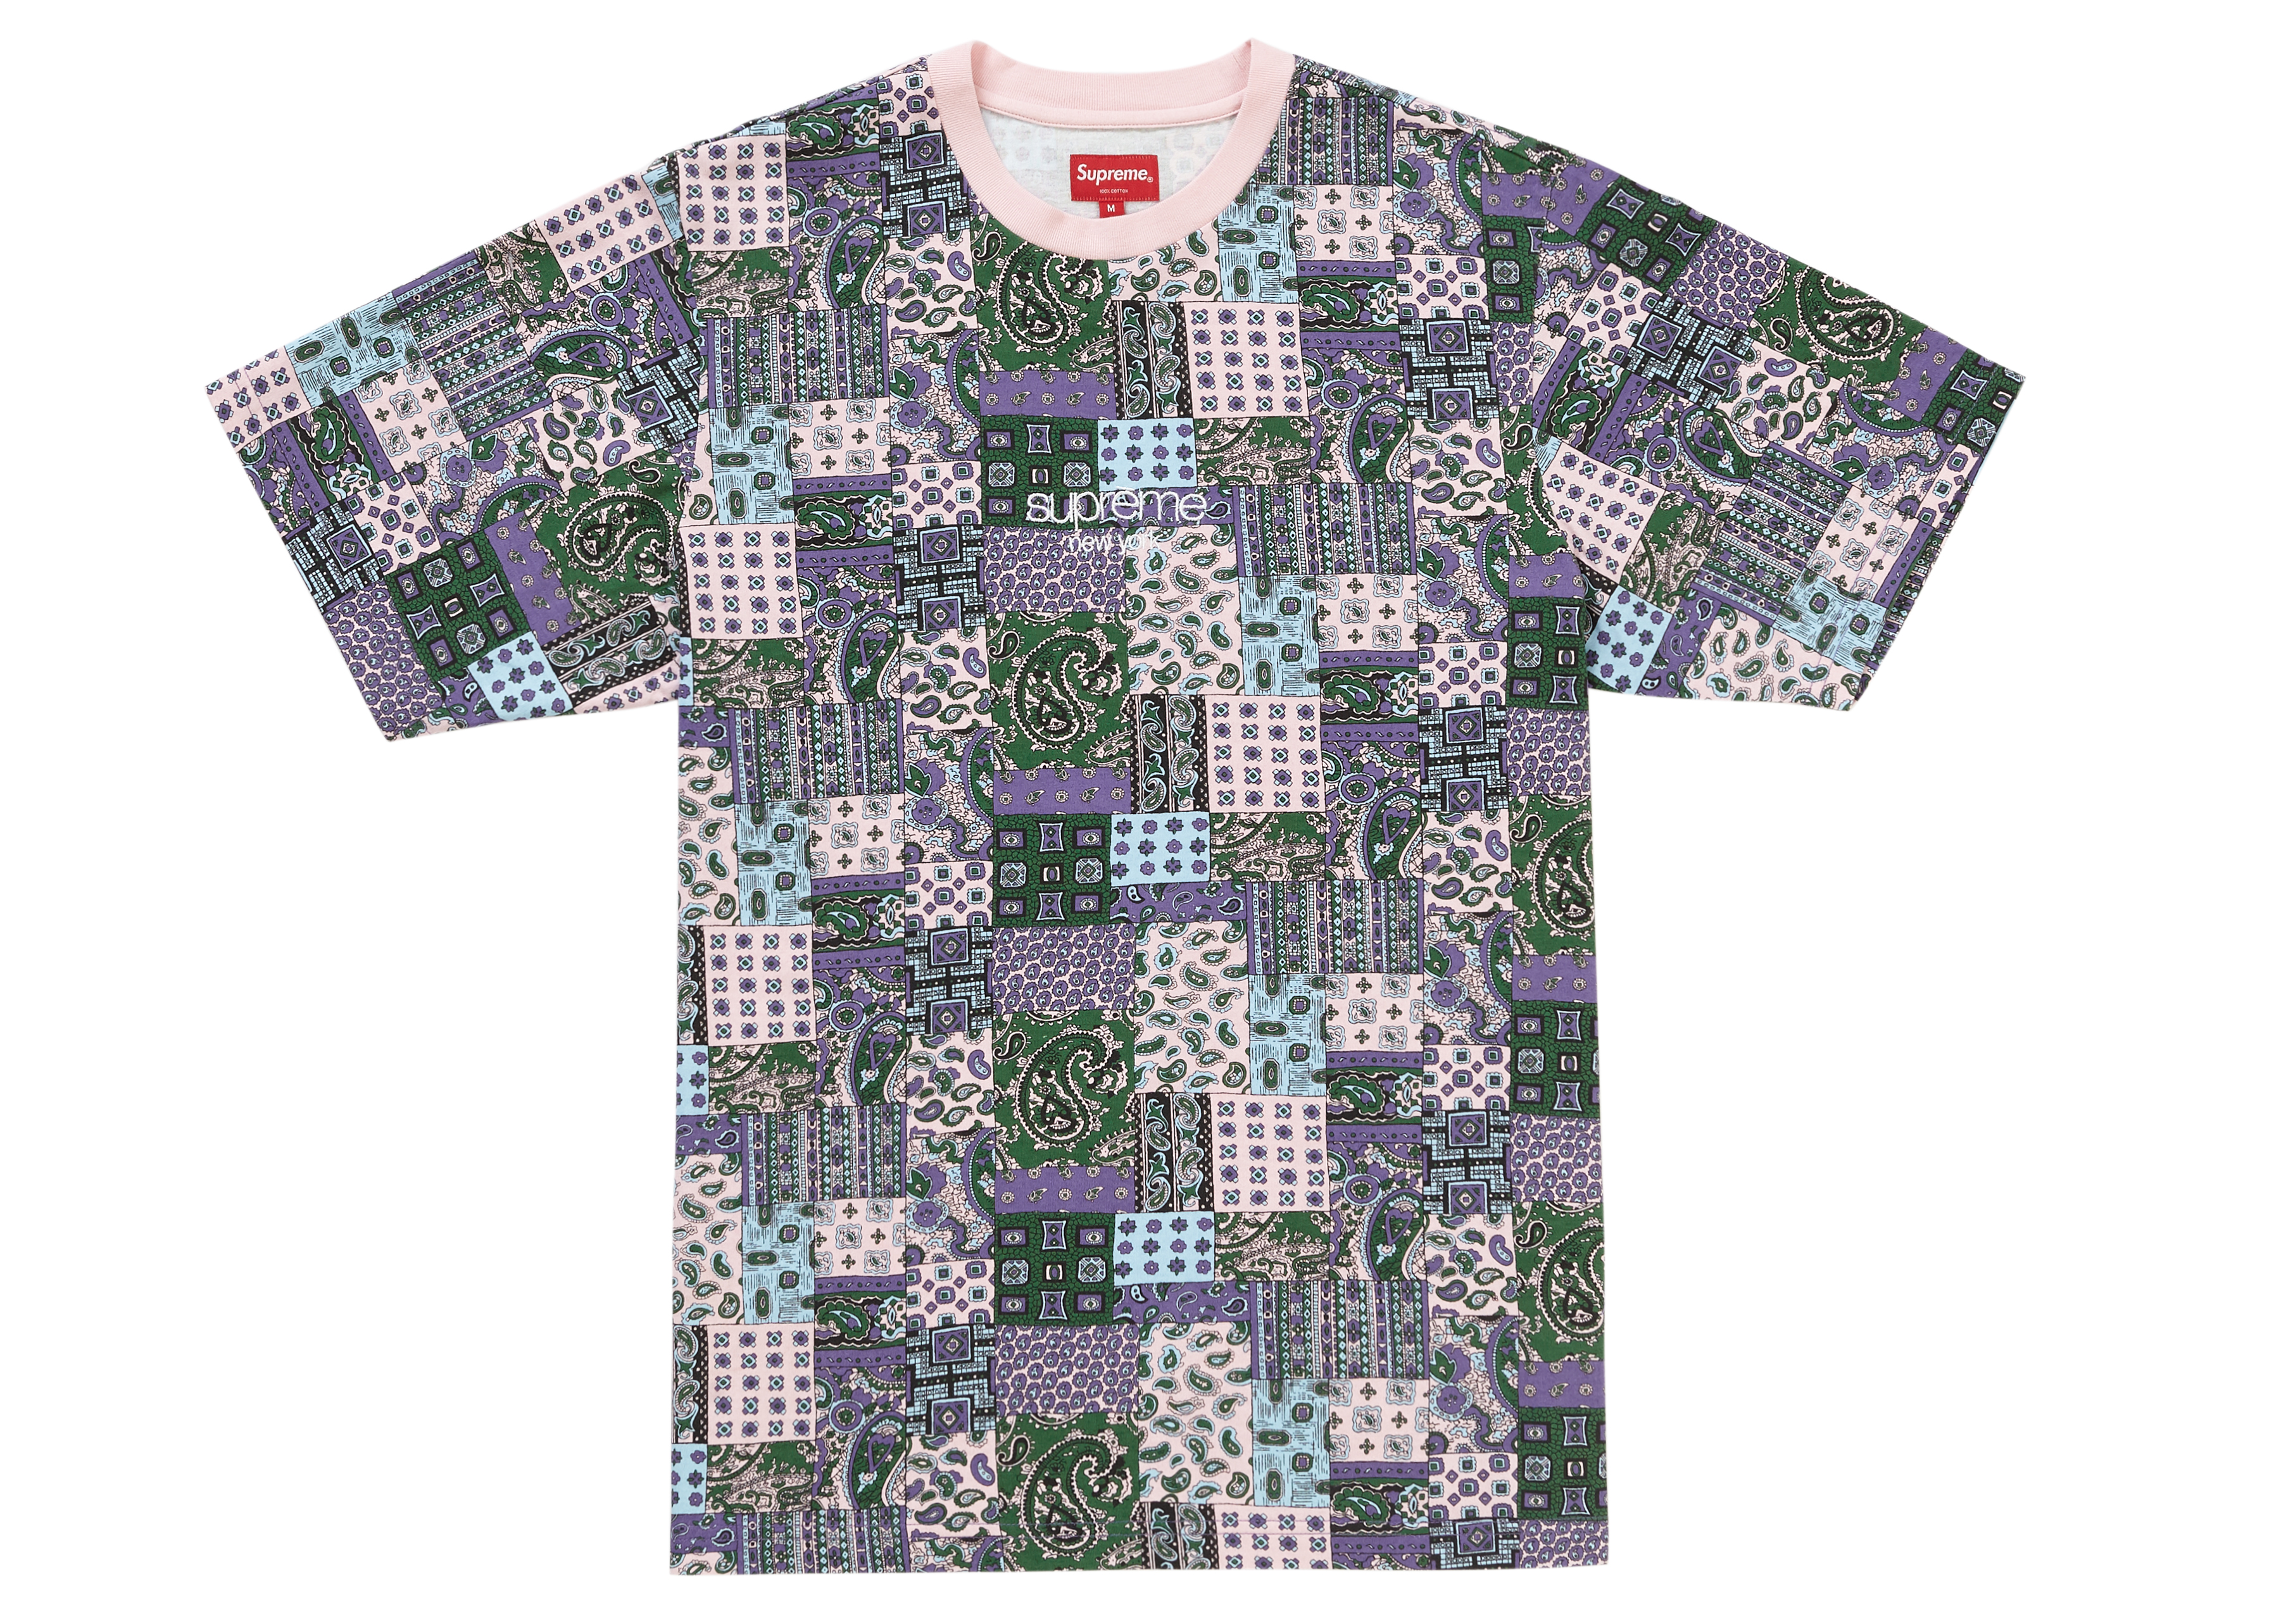 Patchwork Paisley S/S Top supreme